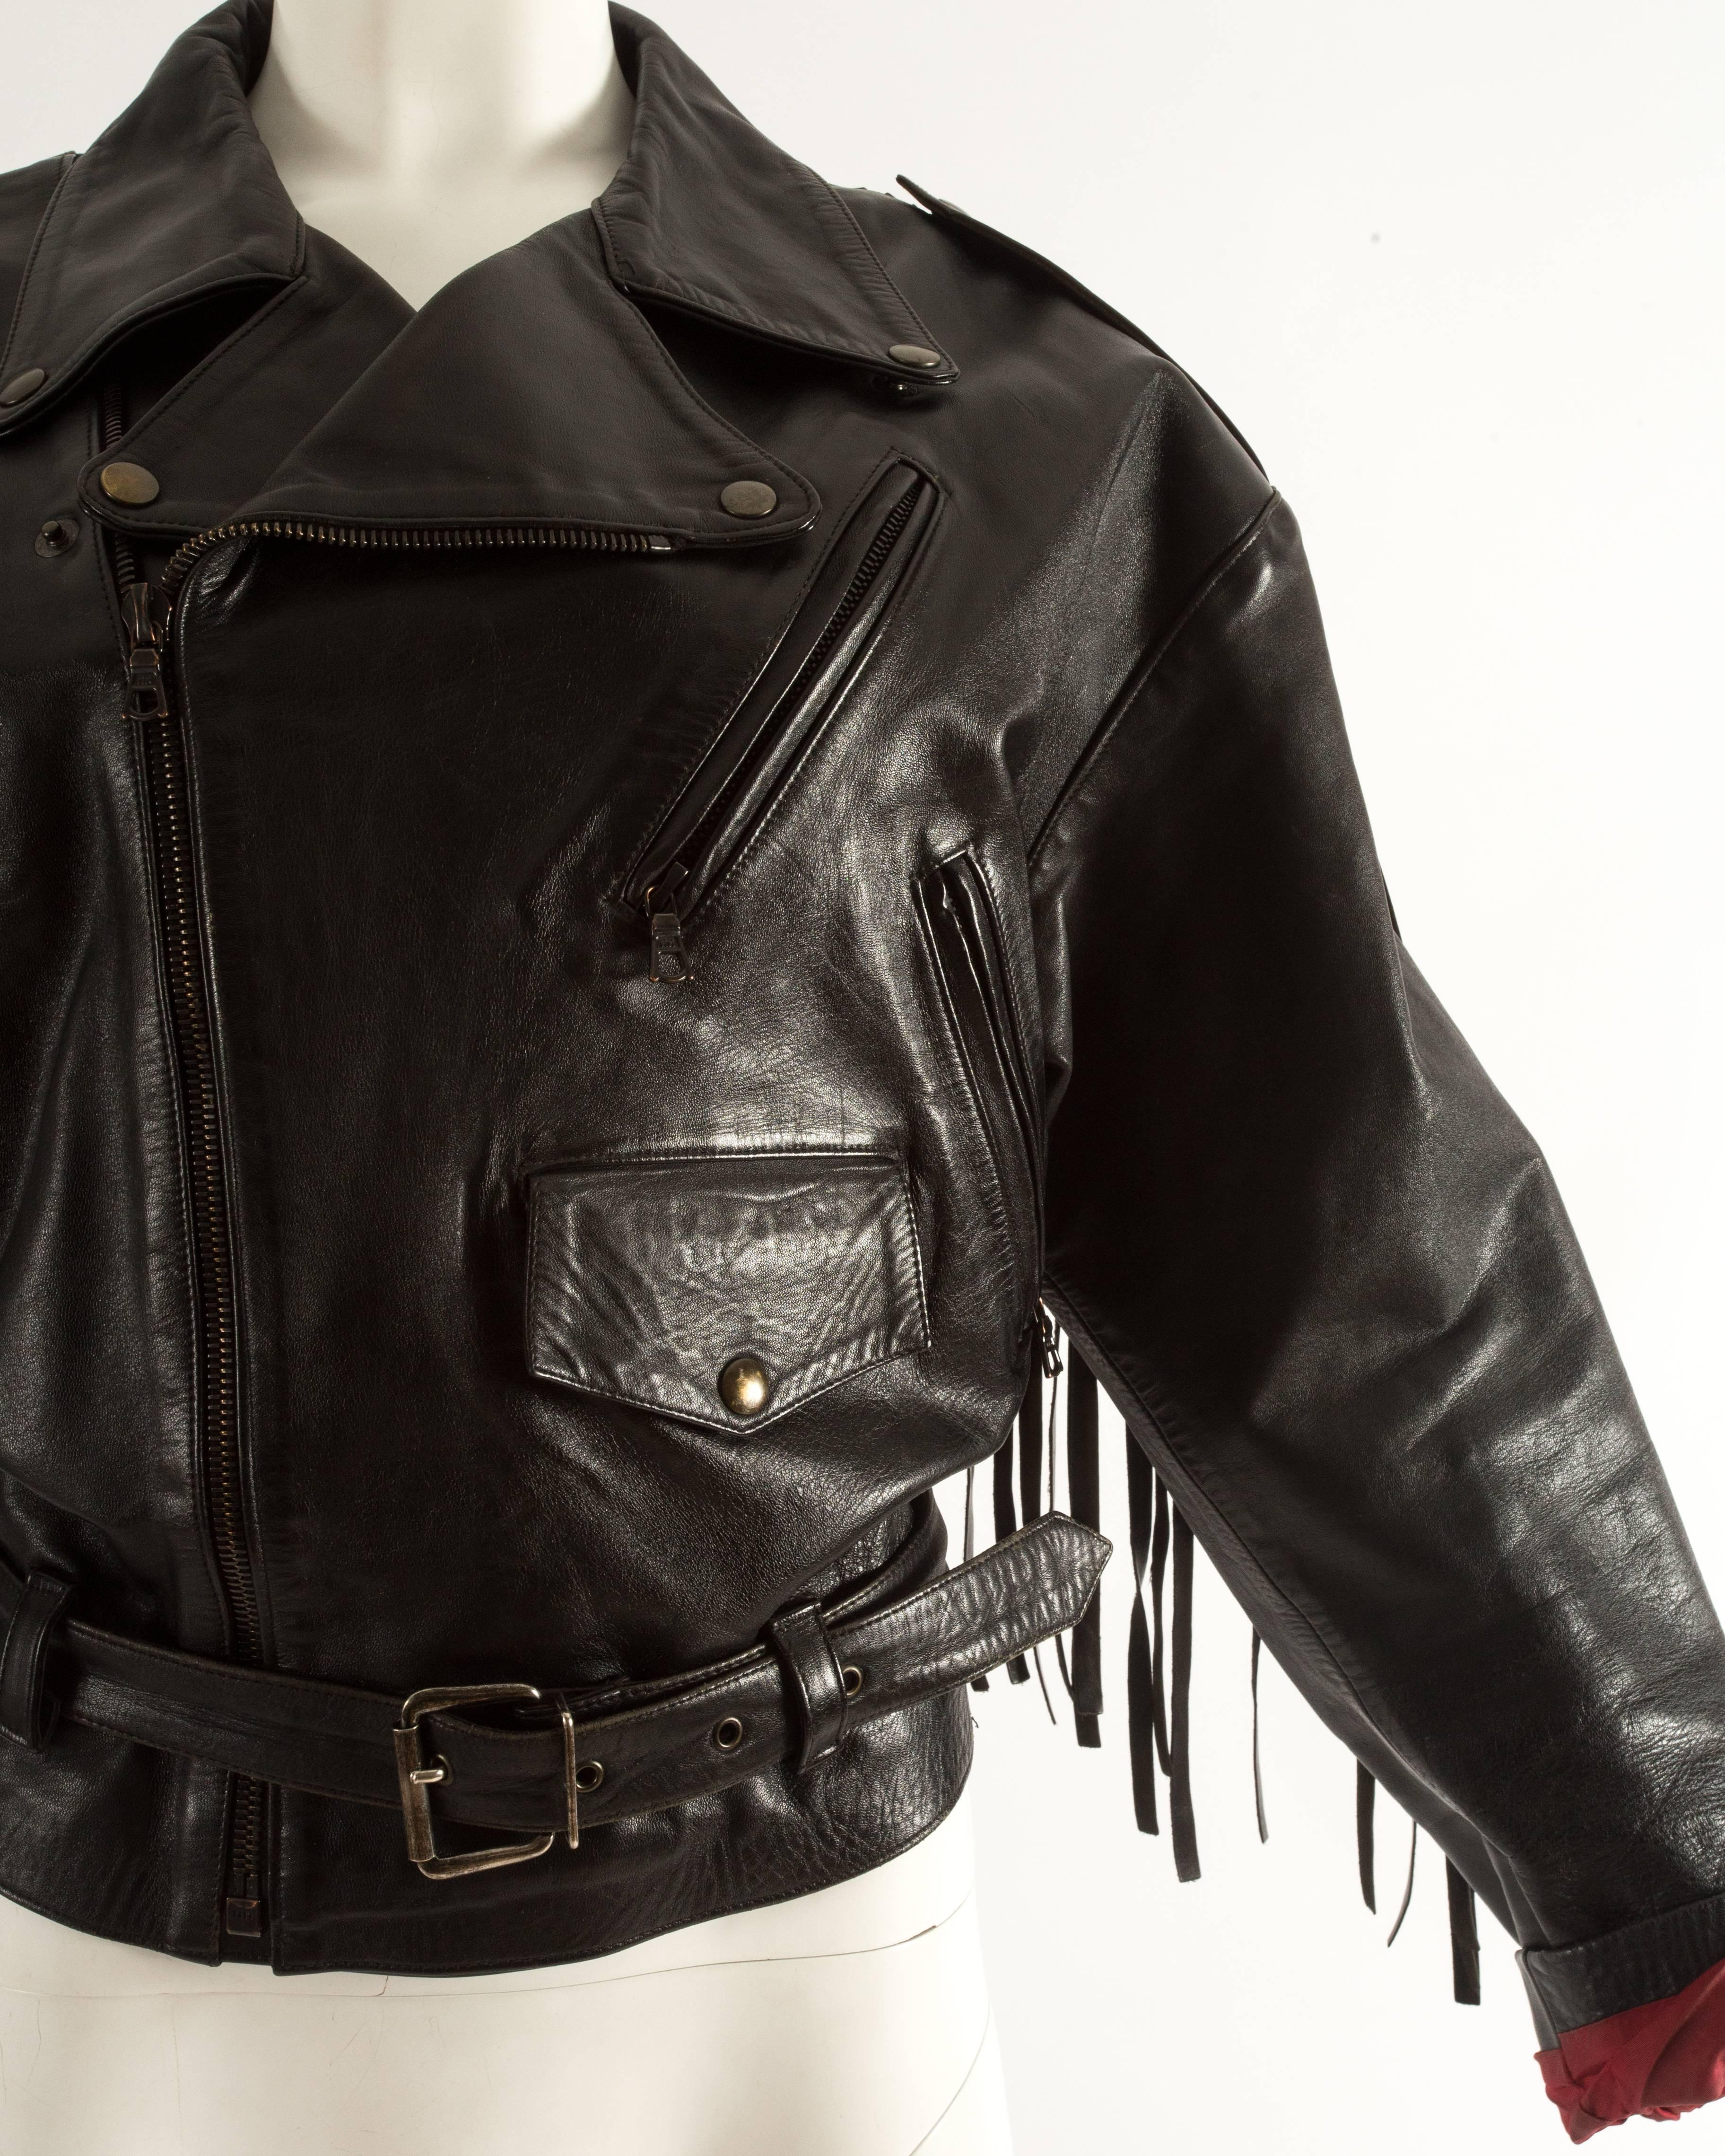 Women's Jean Paul Gaultier Spring-Summer 1985 fringed leather jacket with open back 